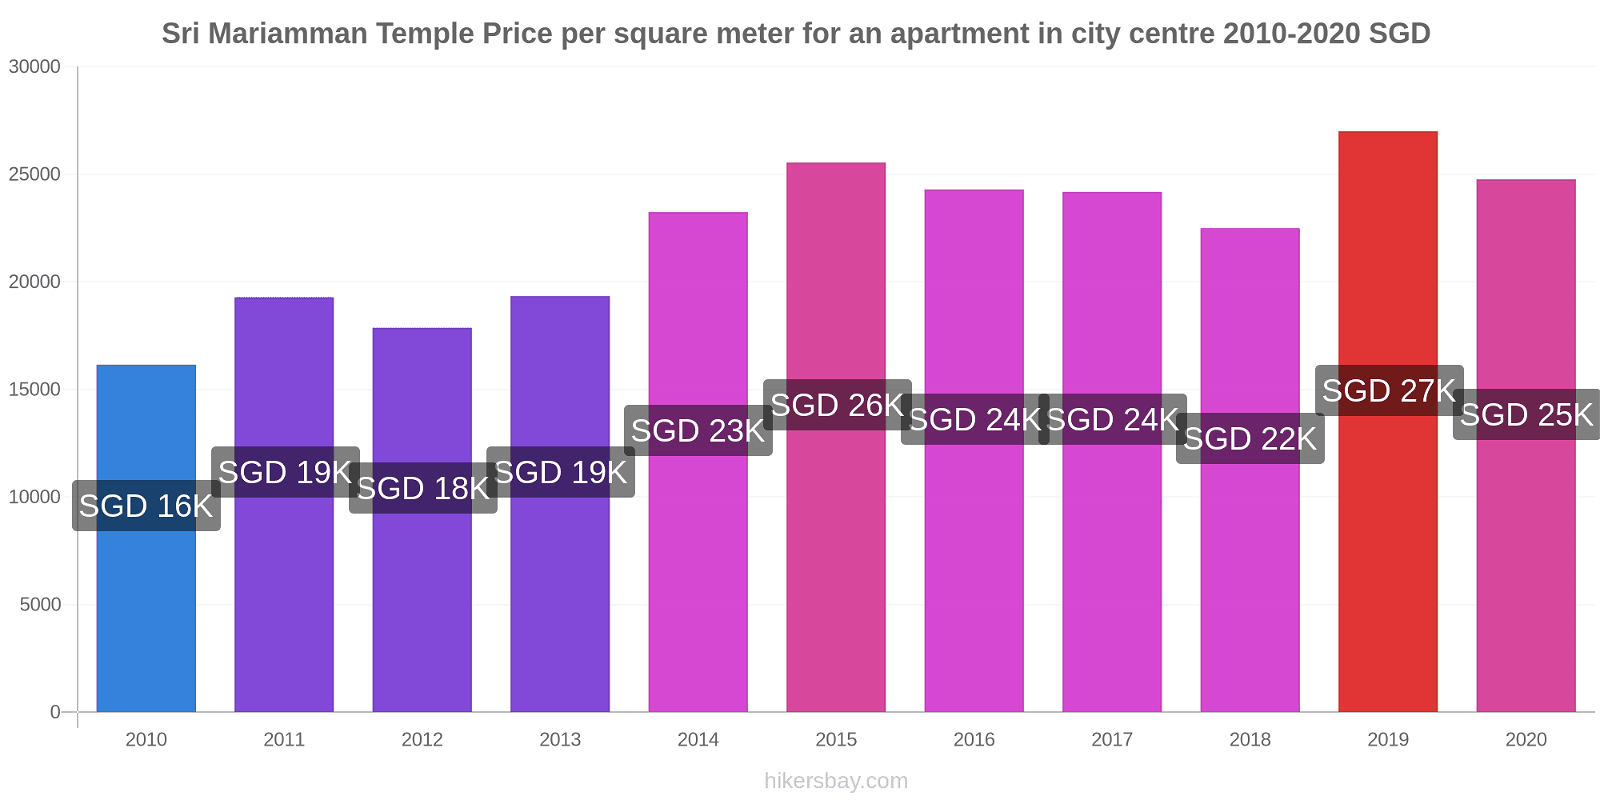 Sri Mariamman Temple price changes Price per square meter for an apartment in city centre hikersbay.com